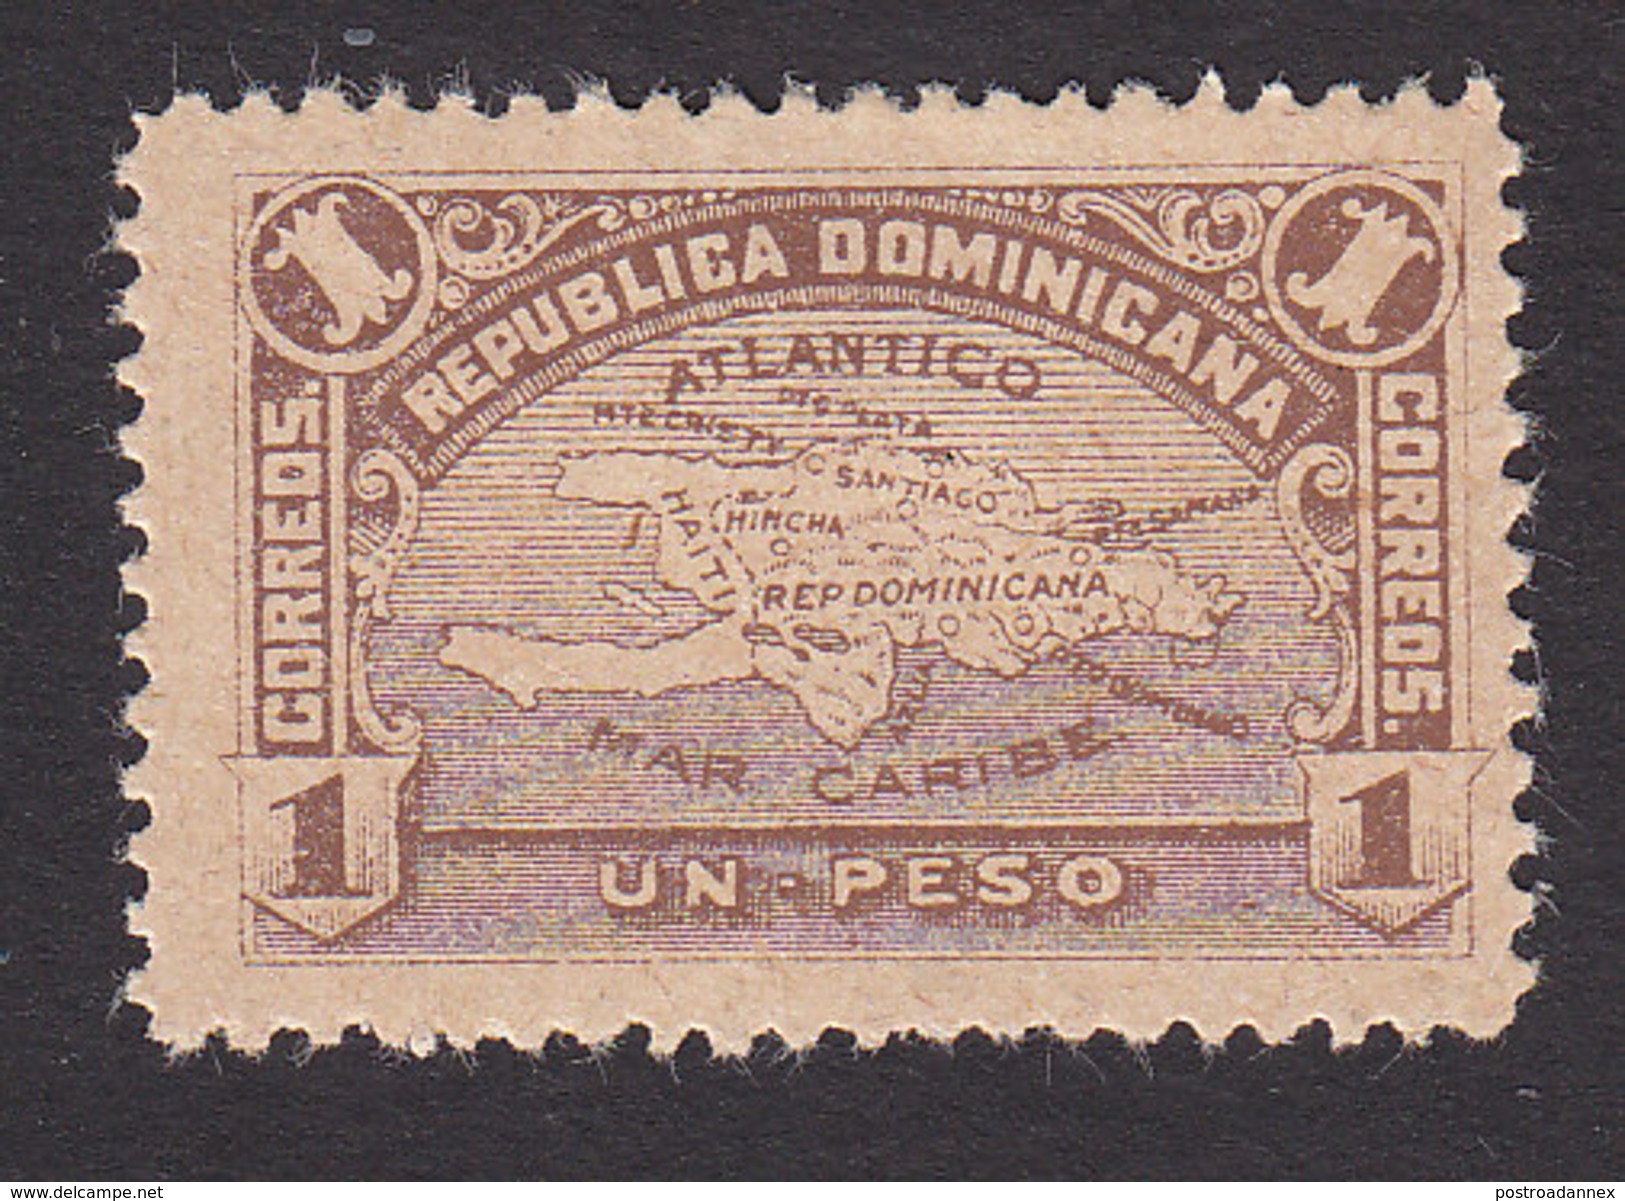 Dominican Republic, Scott #119, Mint Hinged, Map, Issued 1900 - Dominican Republic